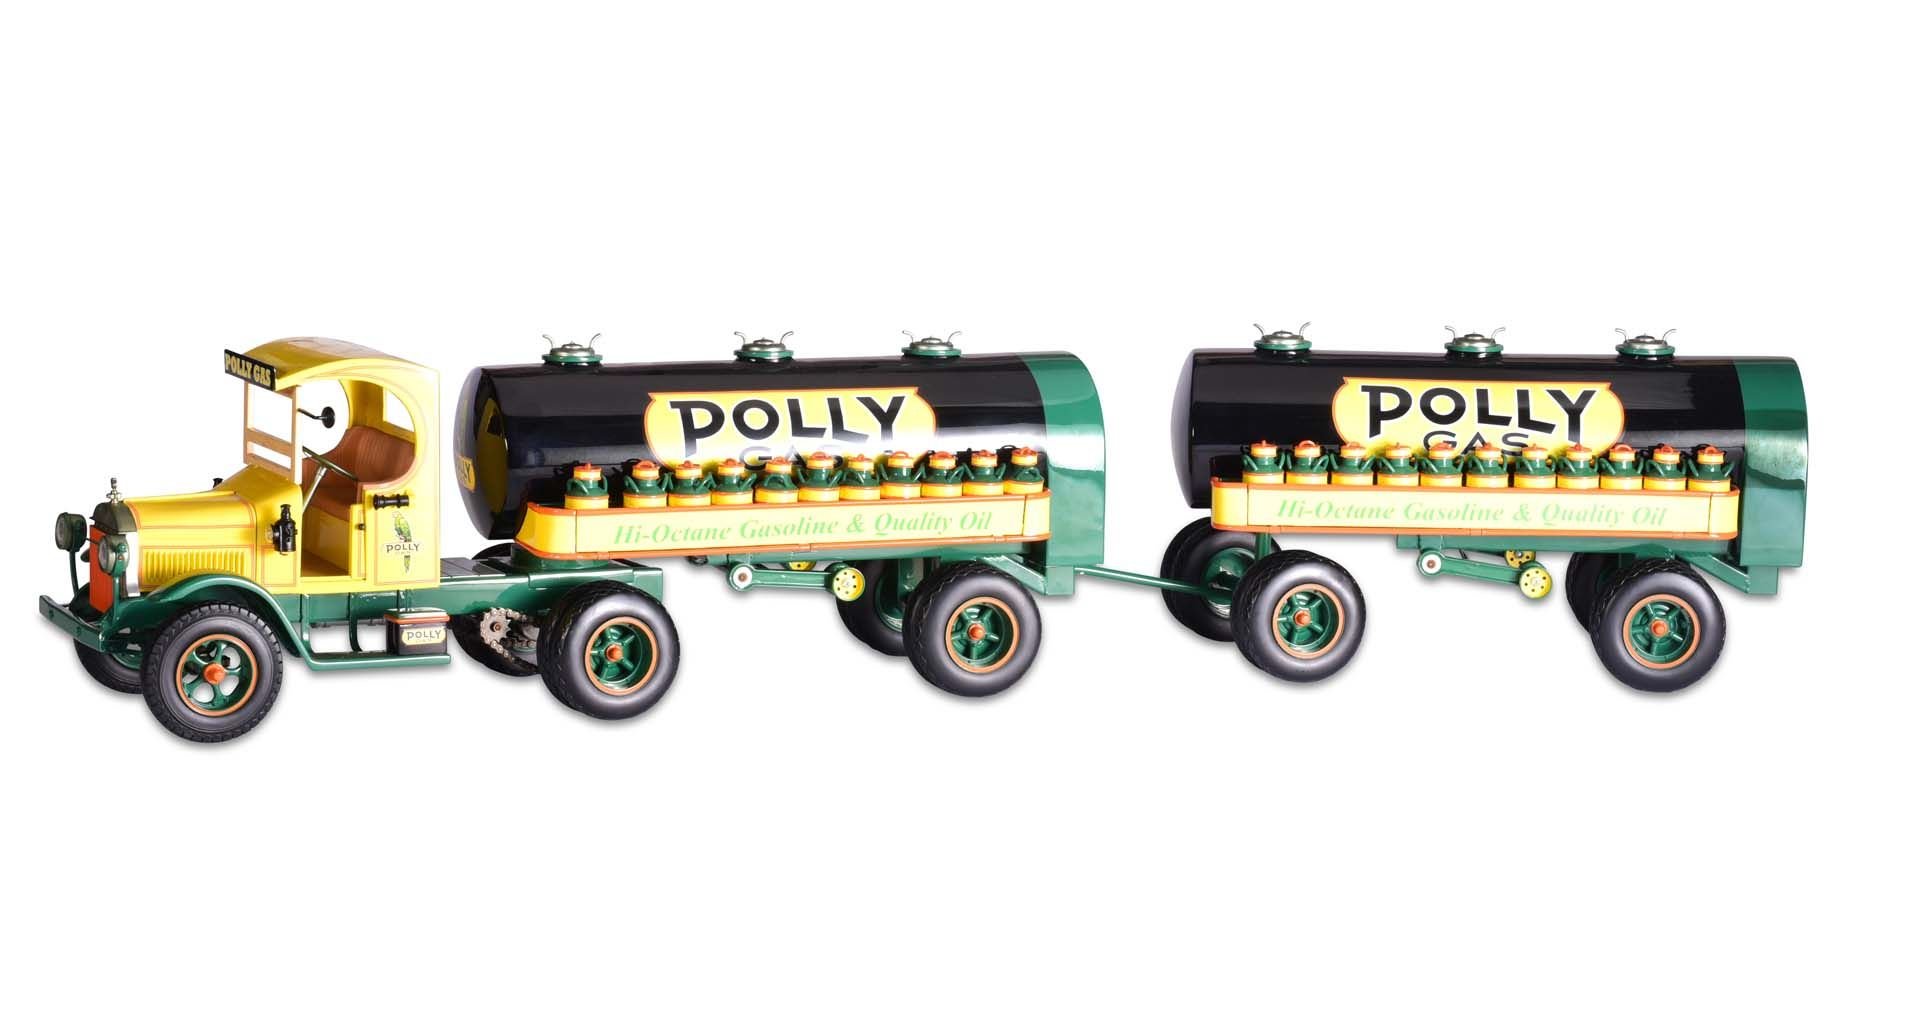 Broad Arrow Auctions | 'Polly Gas' Double Tanker Semi Truck